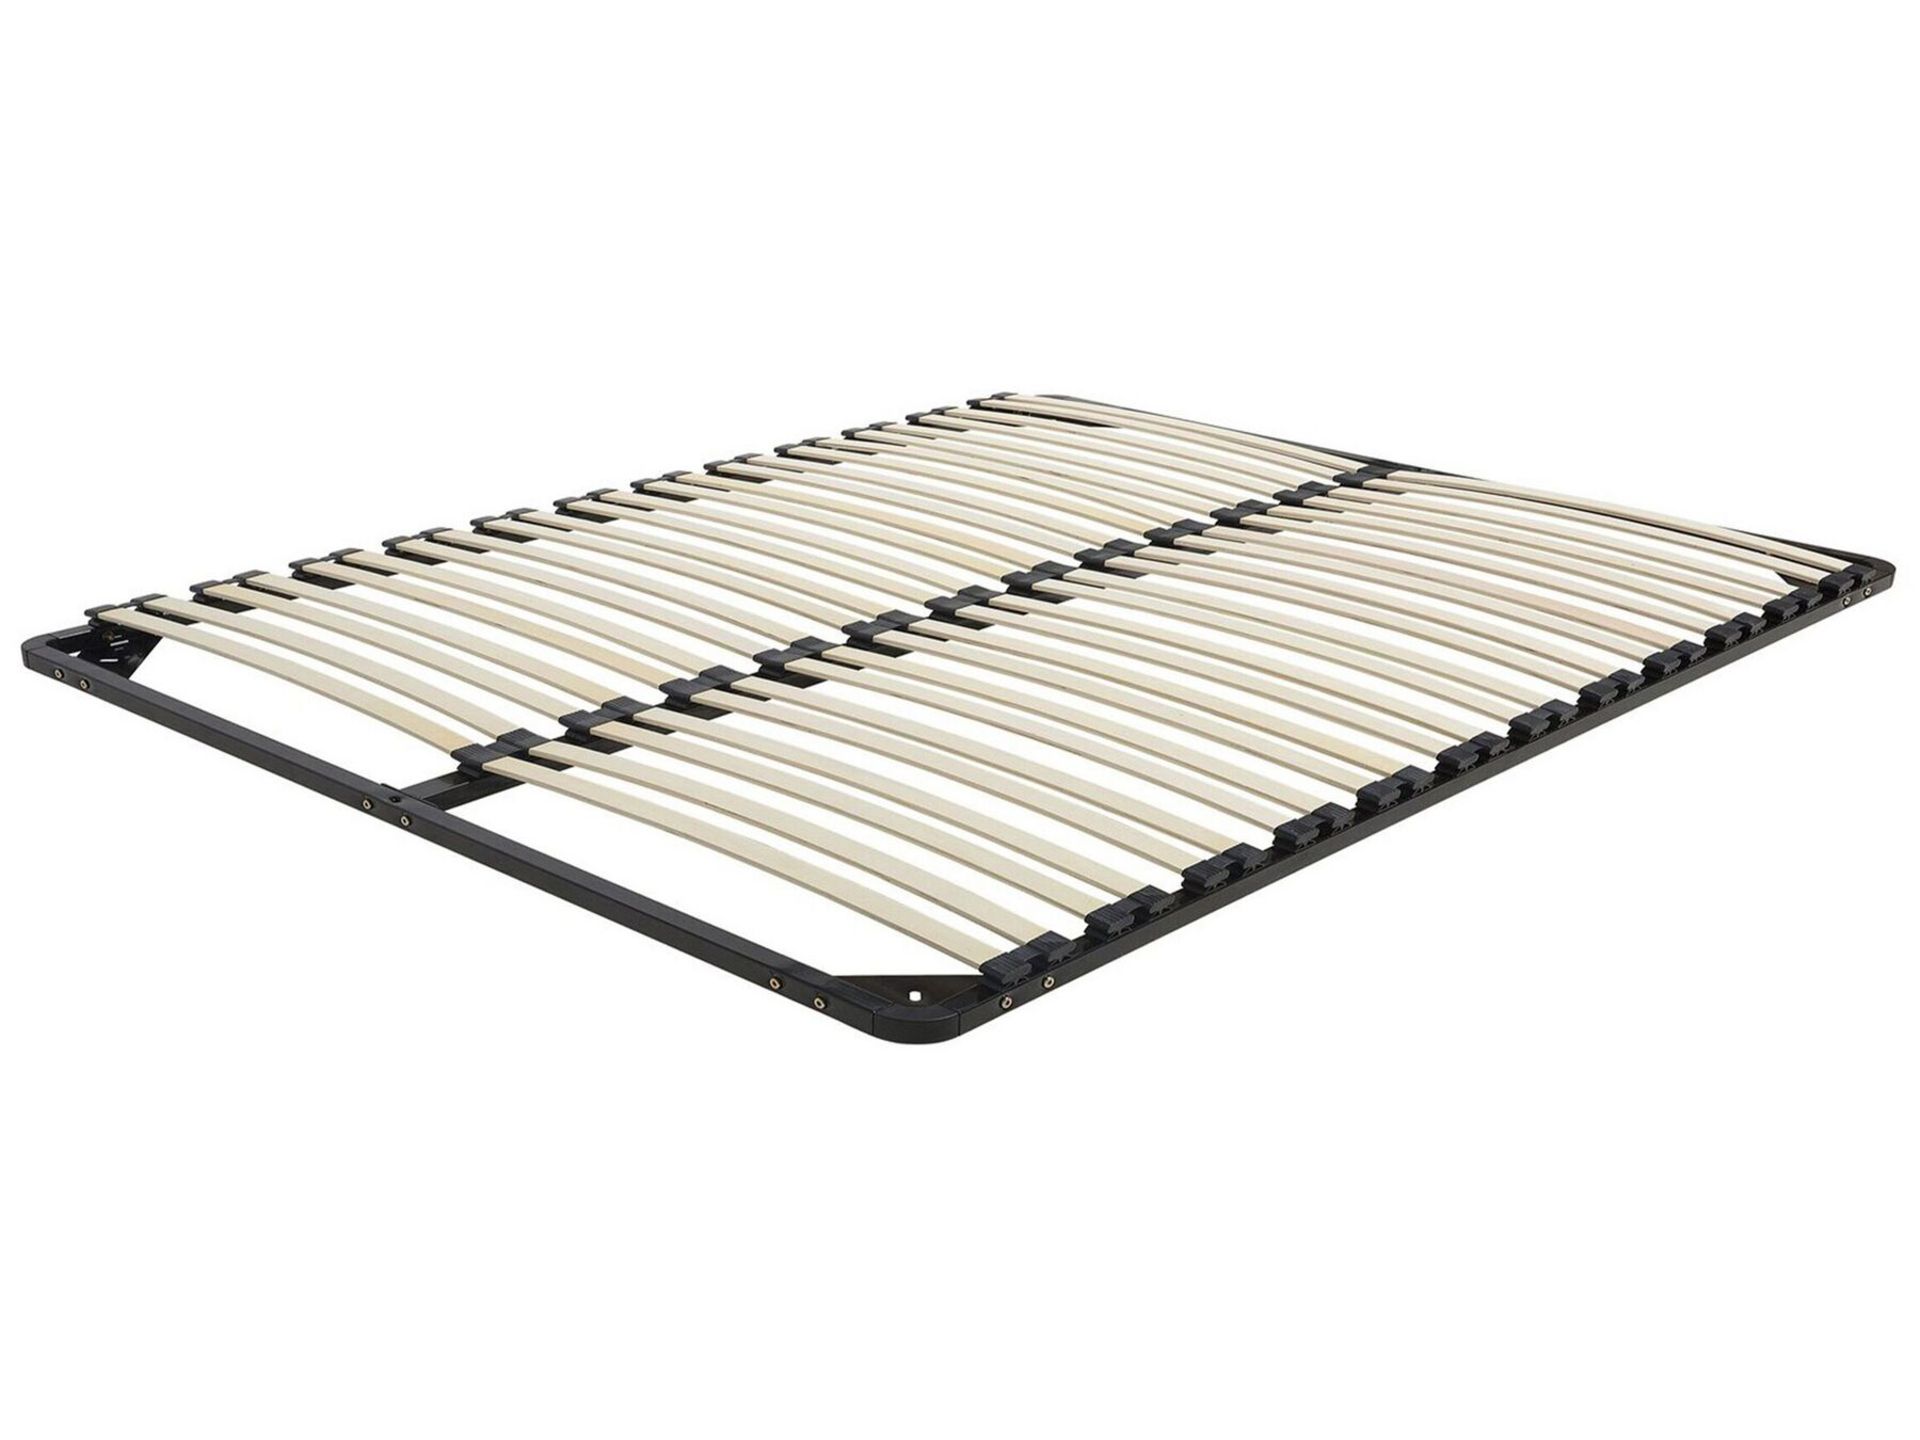 Combourg Double Slatted Bed Base. - R13a.6/7. RRP £439.99. Ensure your sleep is comfortable and